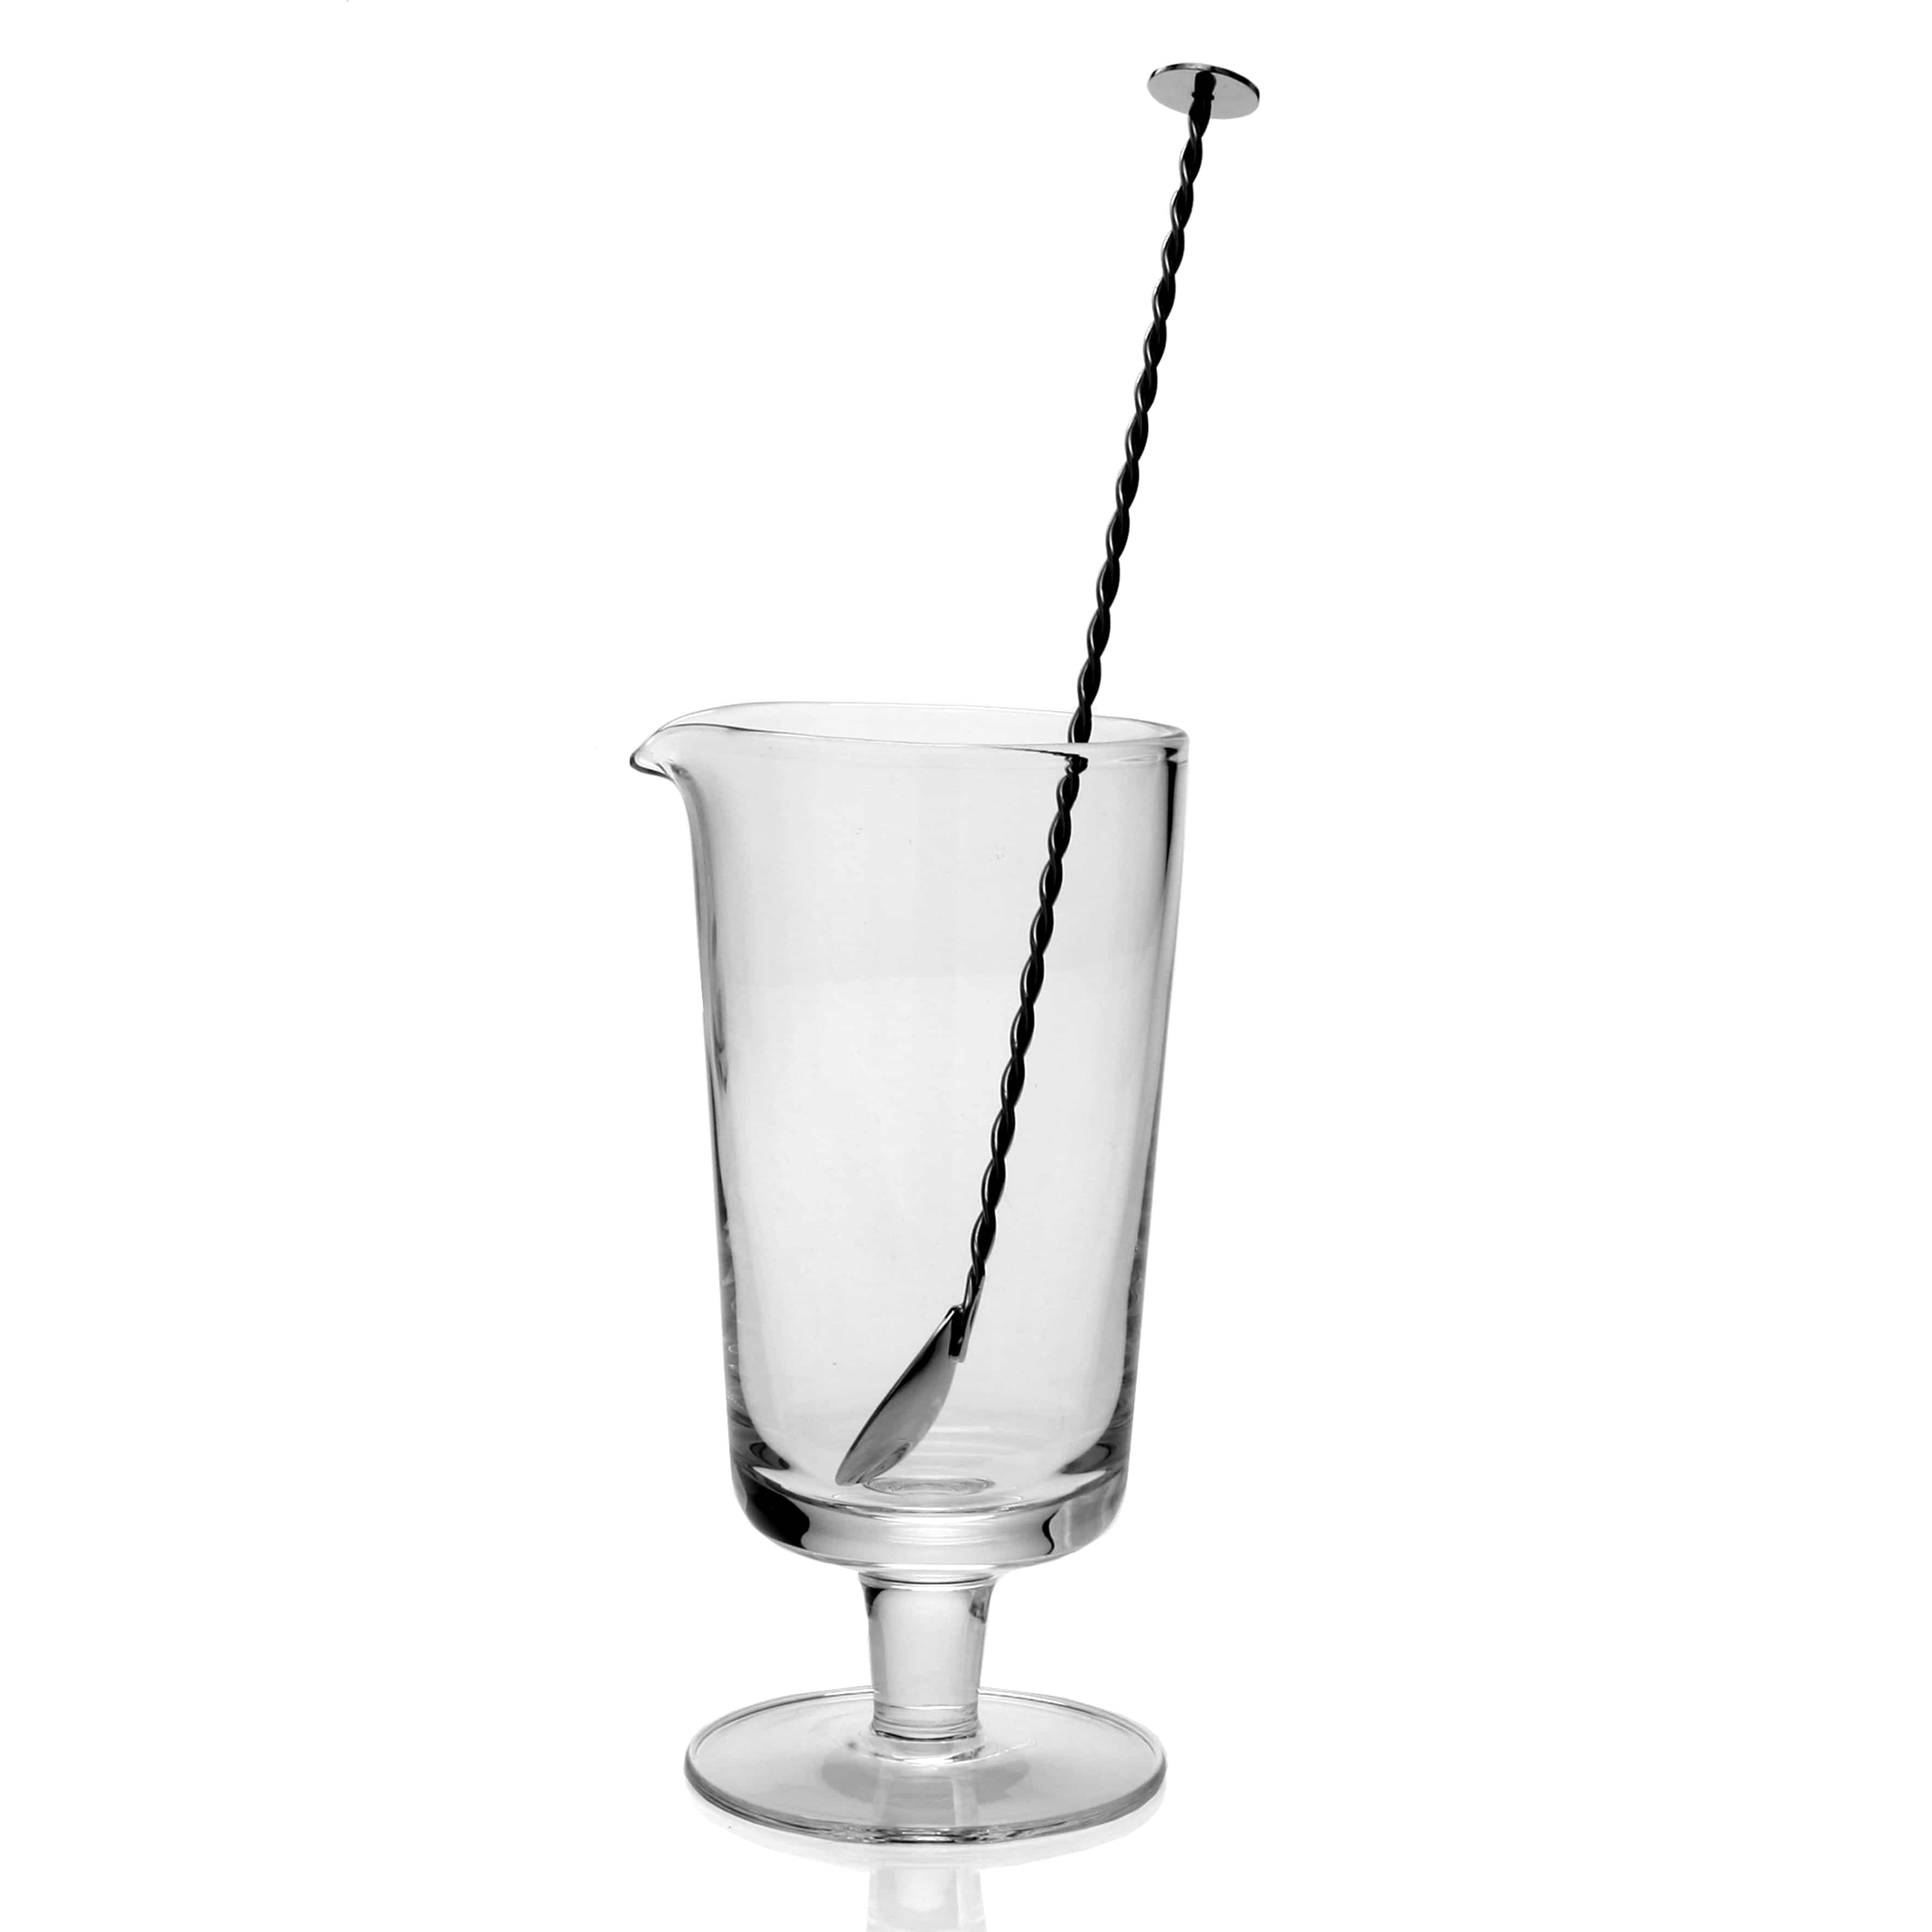 Lillian_807056_Footed_Cocktail_Mixer_and_Stirrer_White_BG.jpg